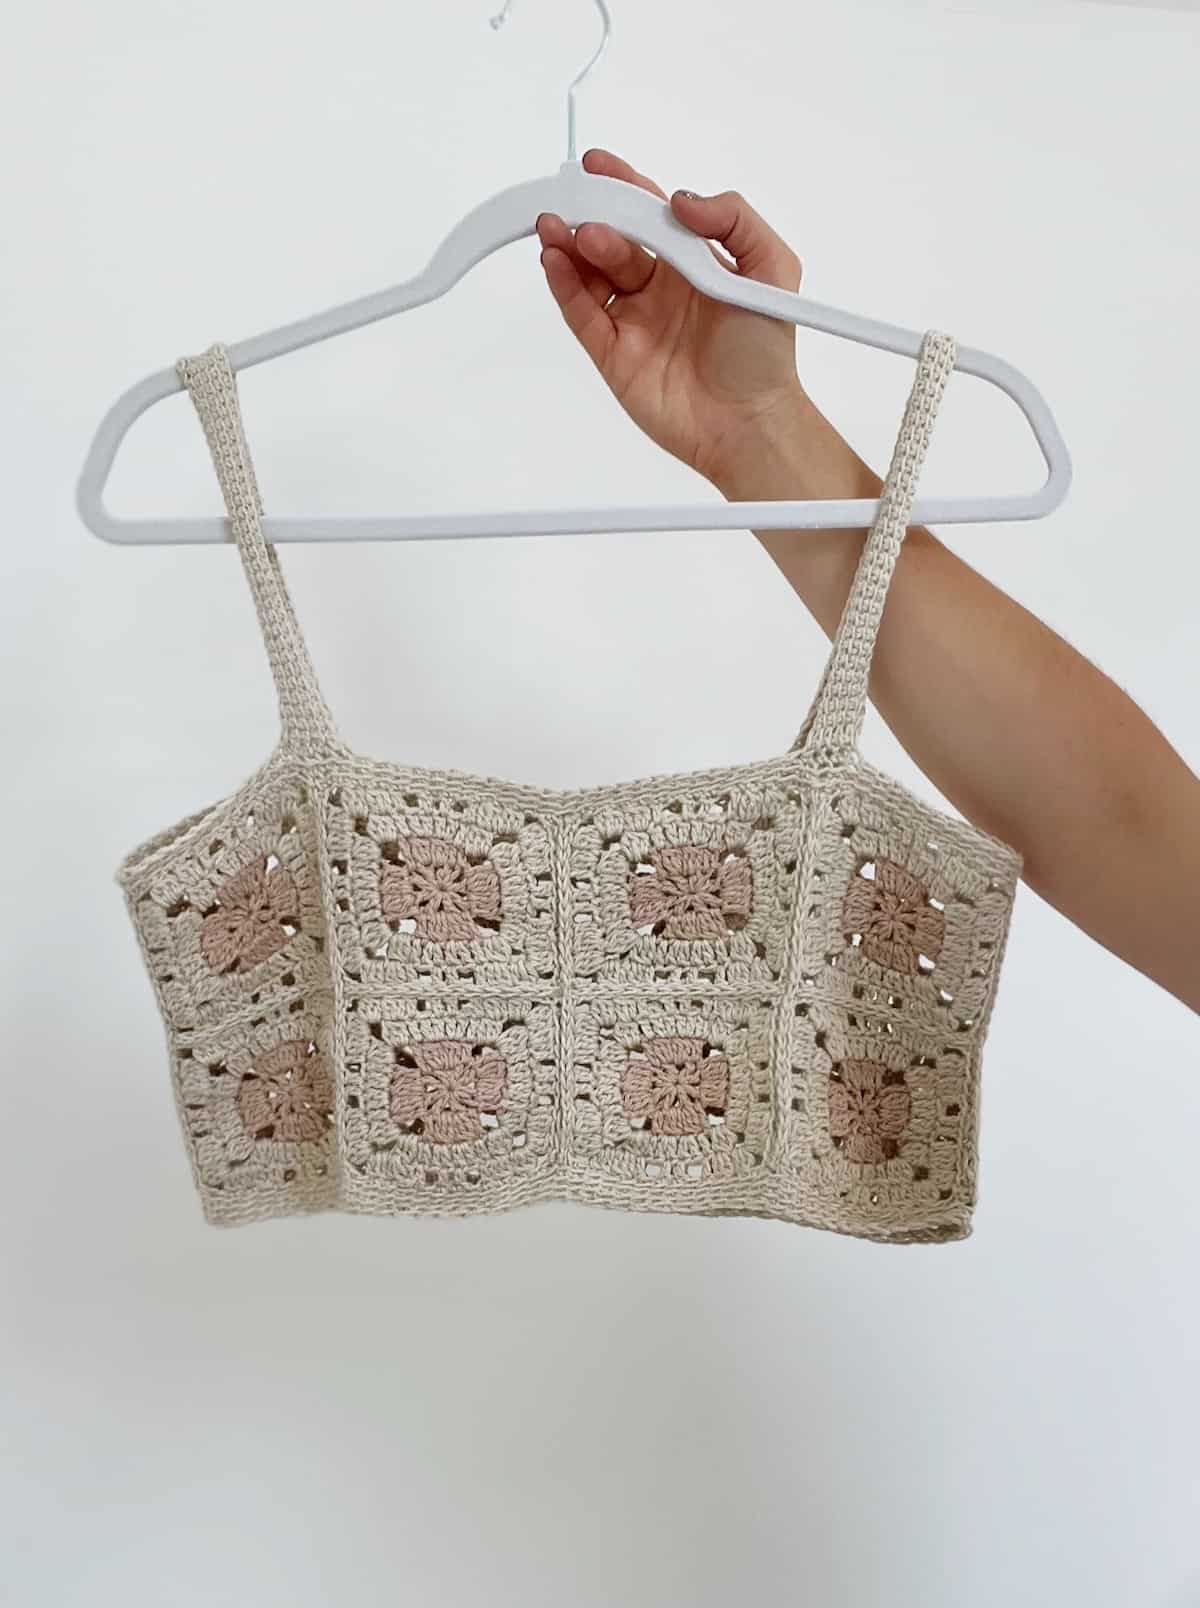 Person holding up a crochet top made from squares on a hanger.